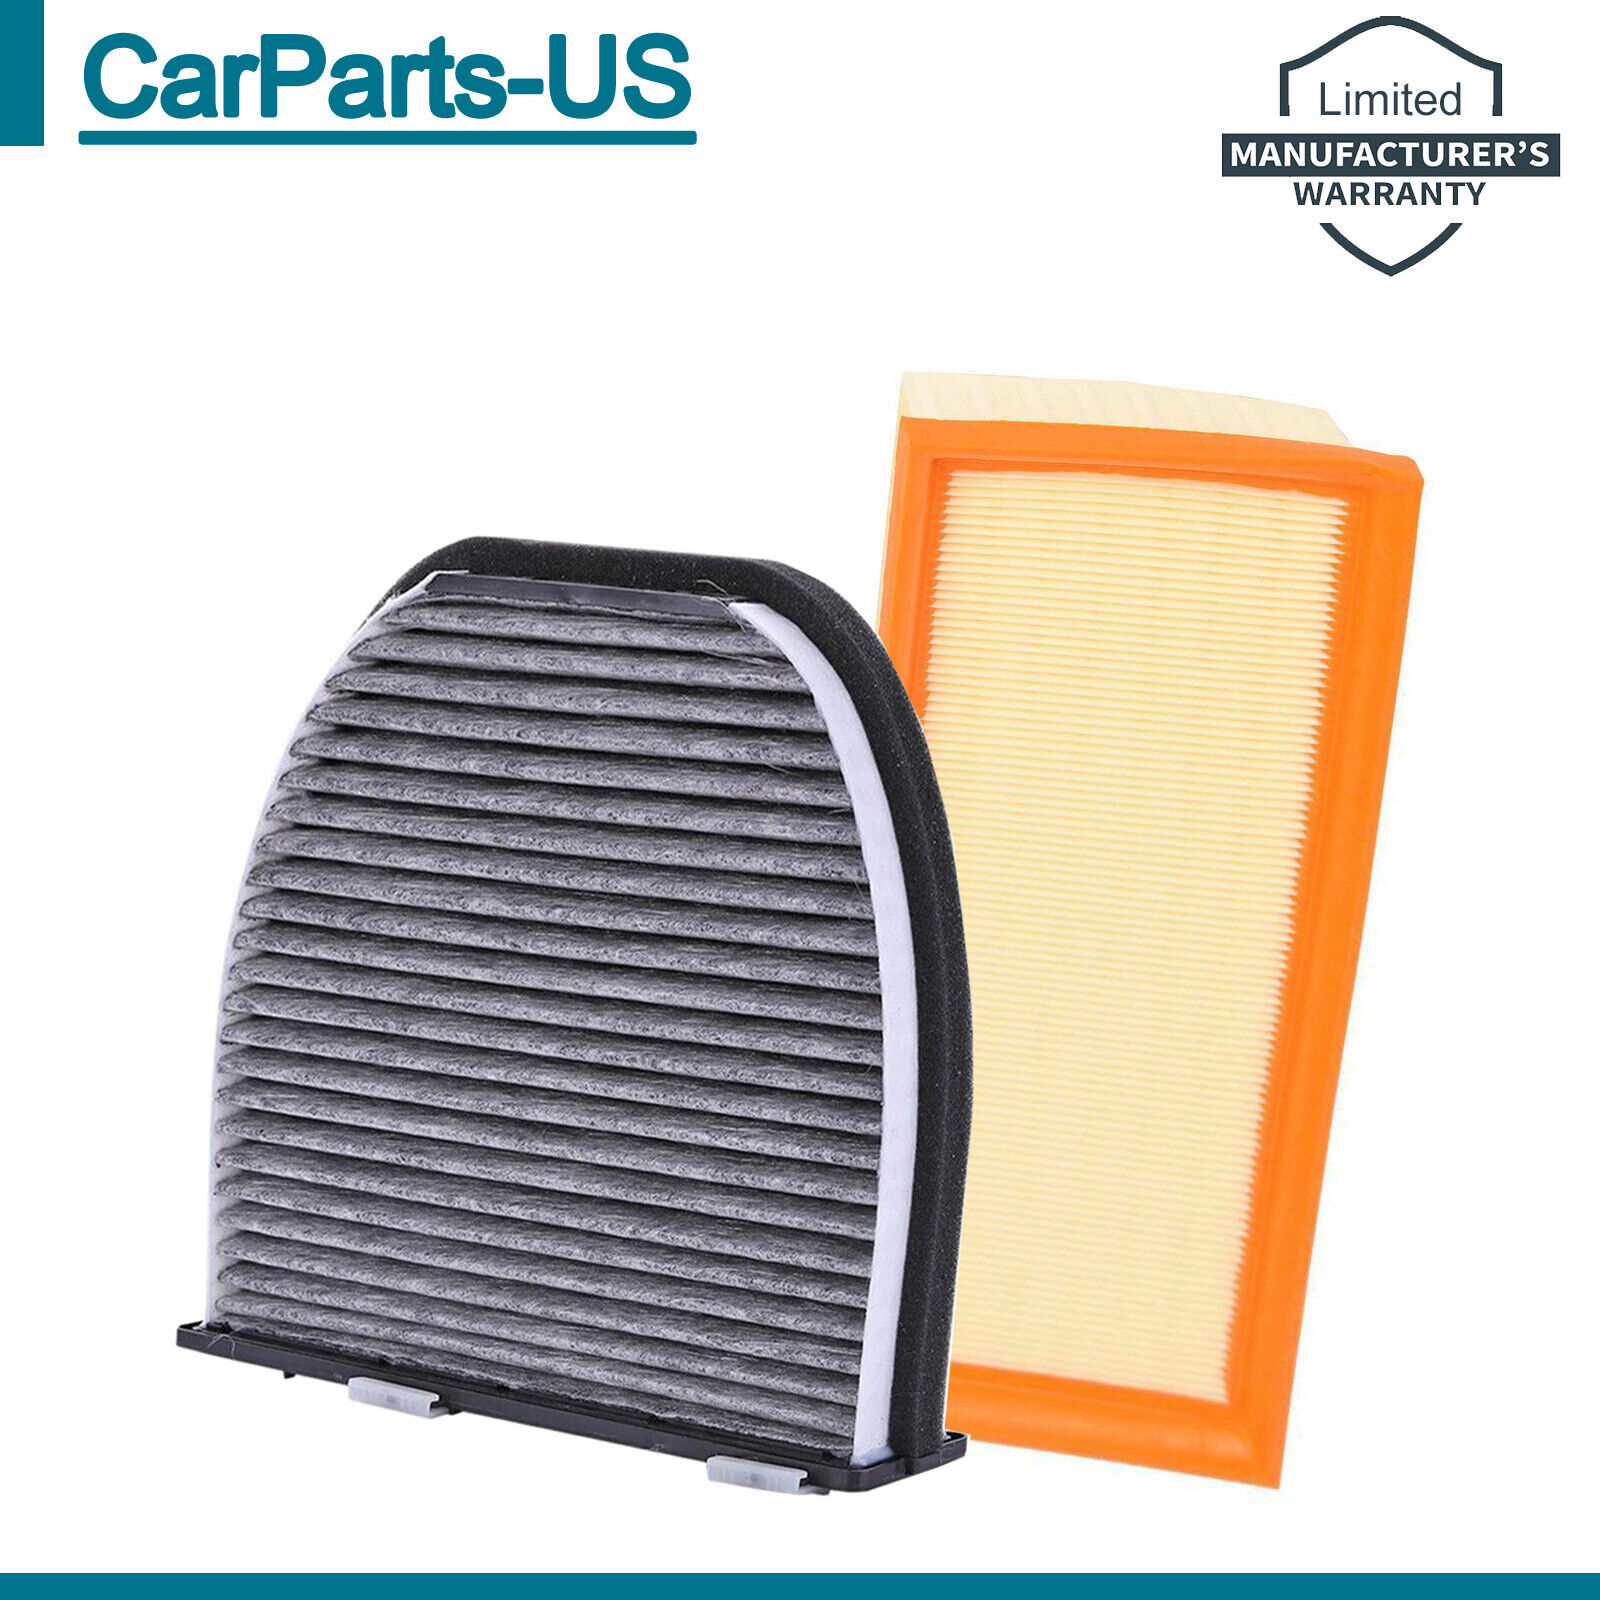 Engine & Cabin Air Filter for 2012+AMG E63 SL63 CLS63 SL550 E550